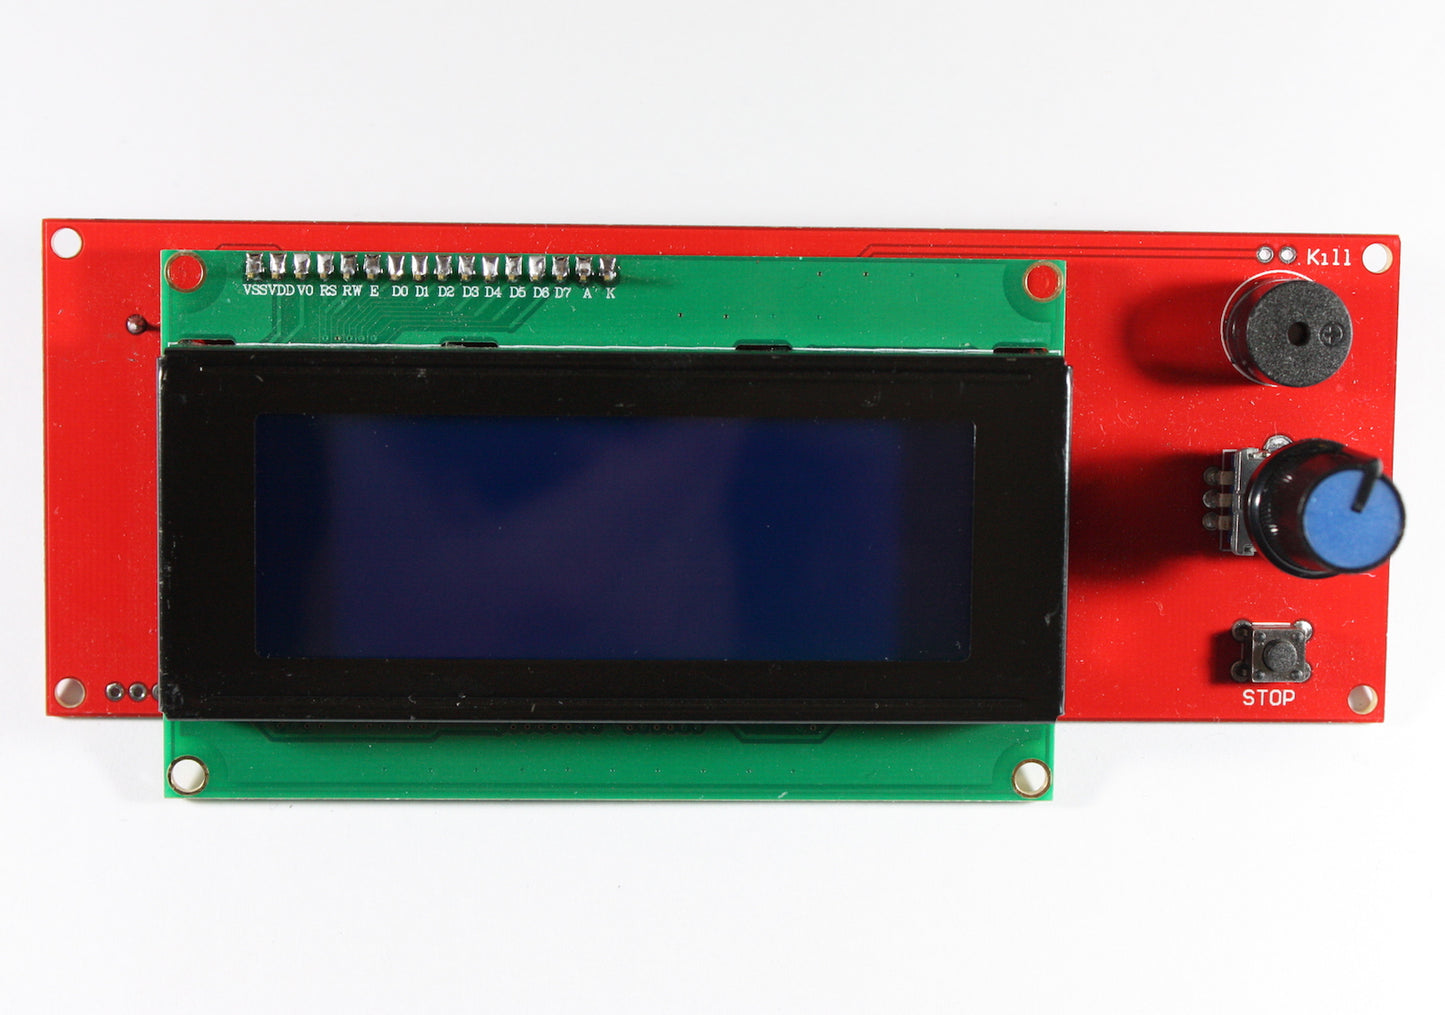 RAMPS 1.4 Display Kit with 2004 LCD and Controller